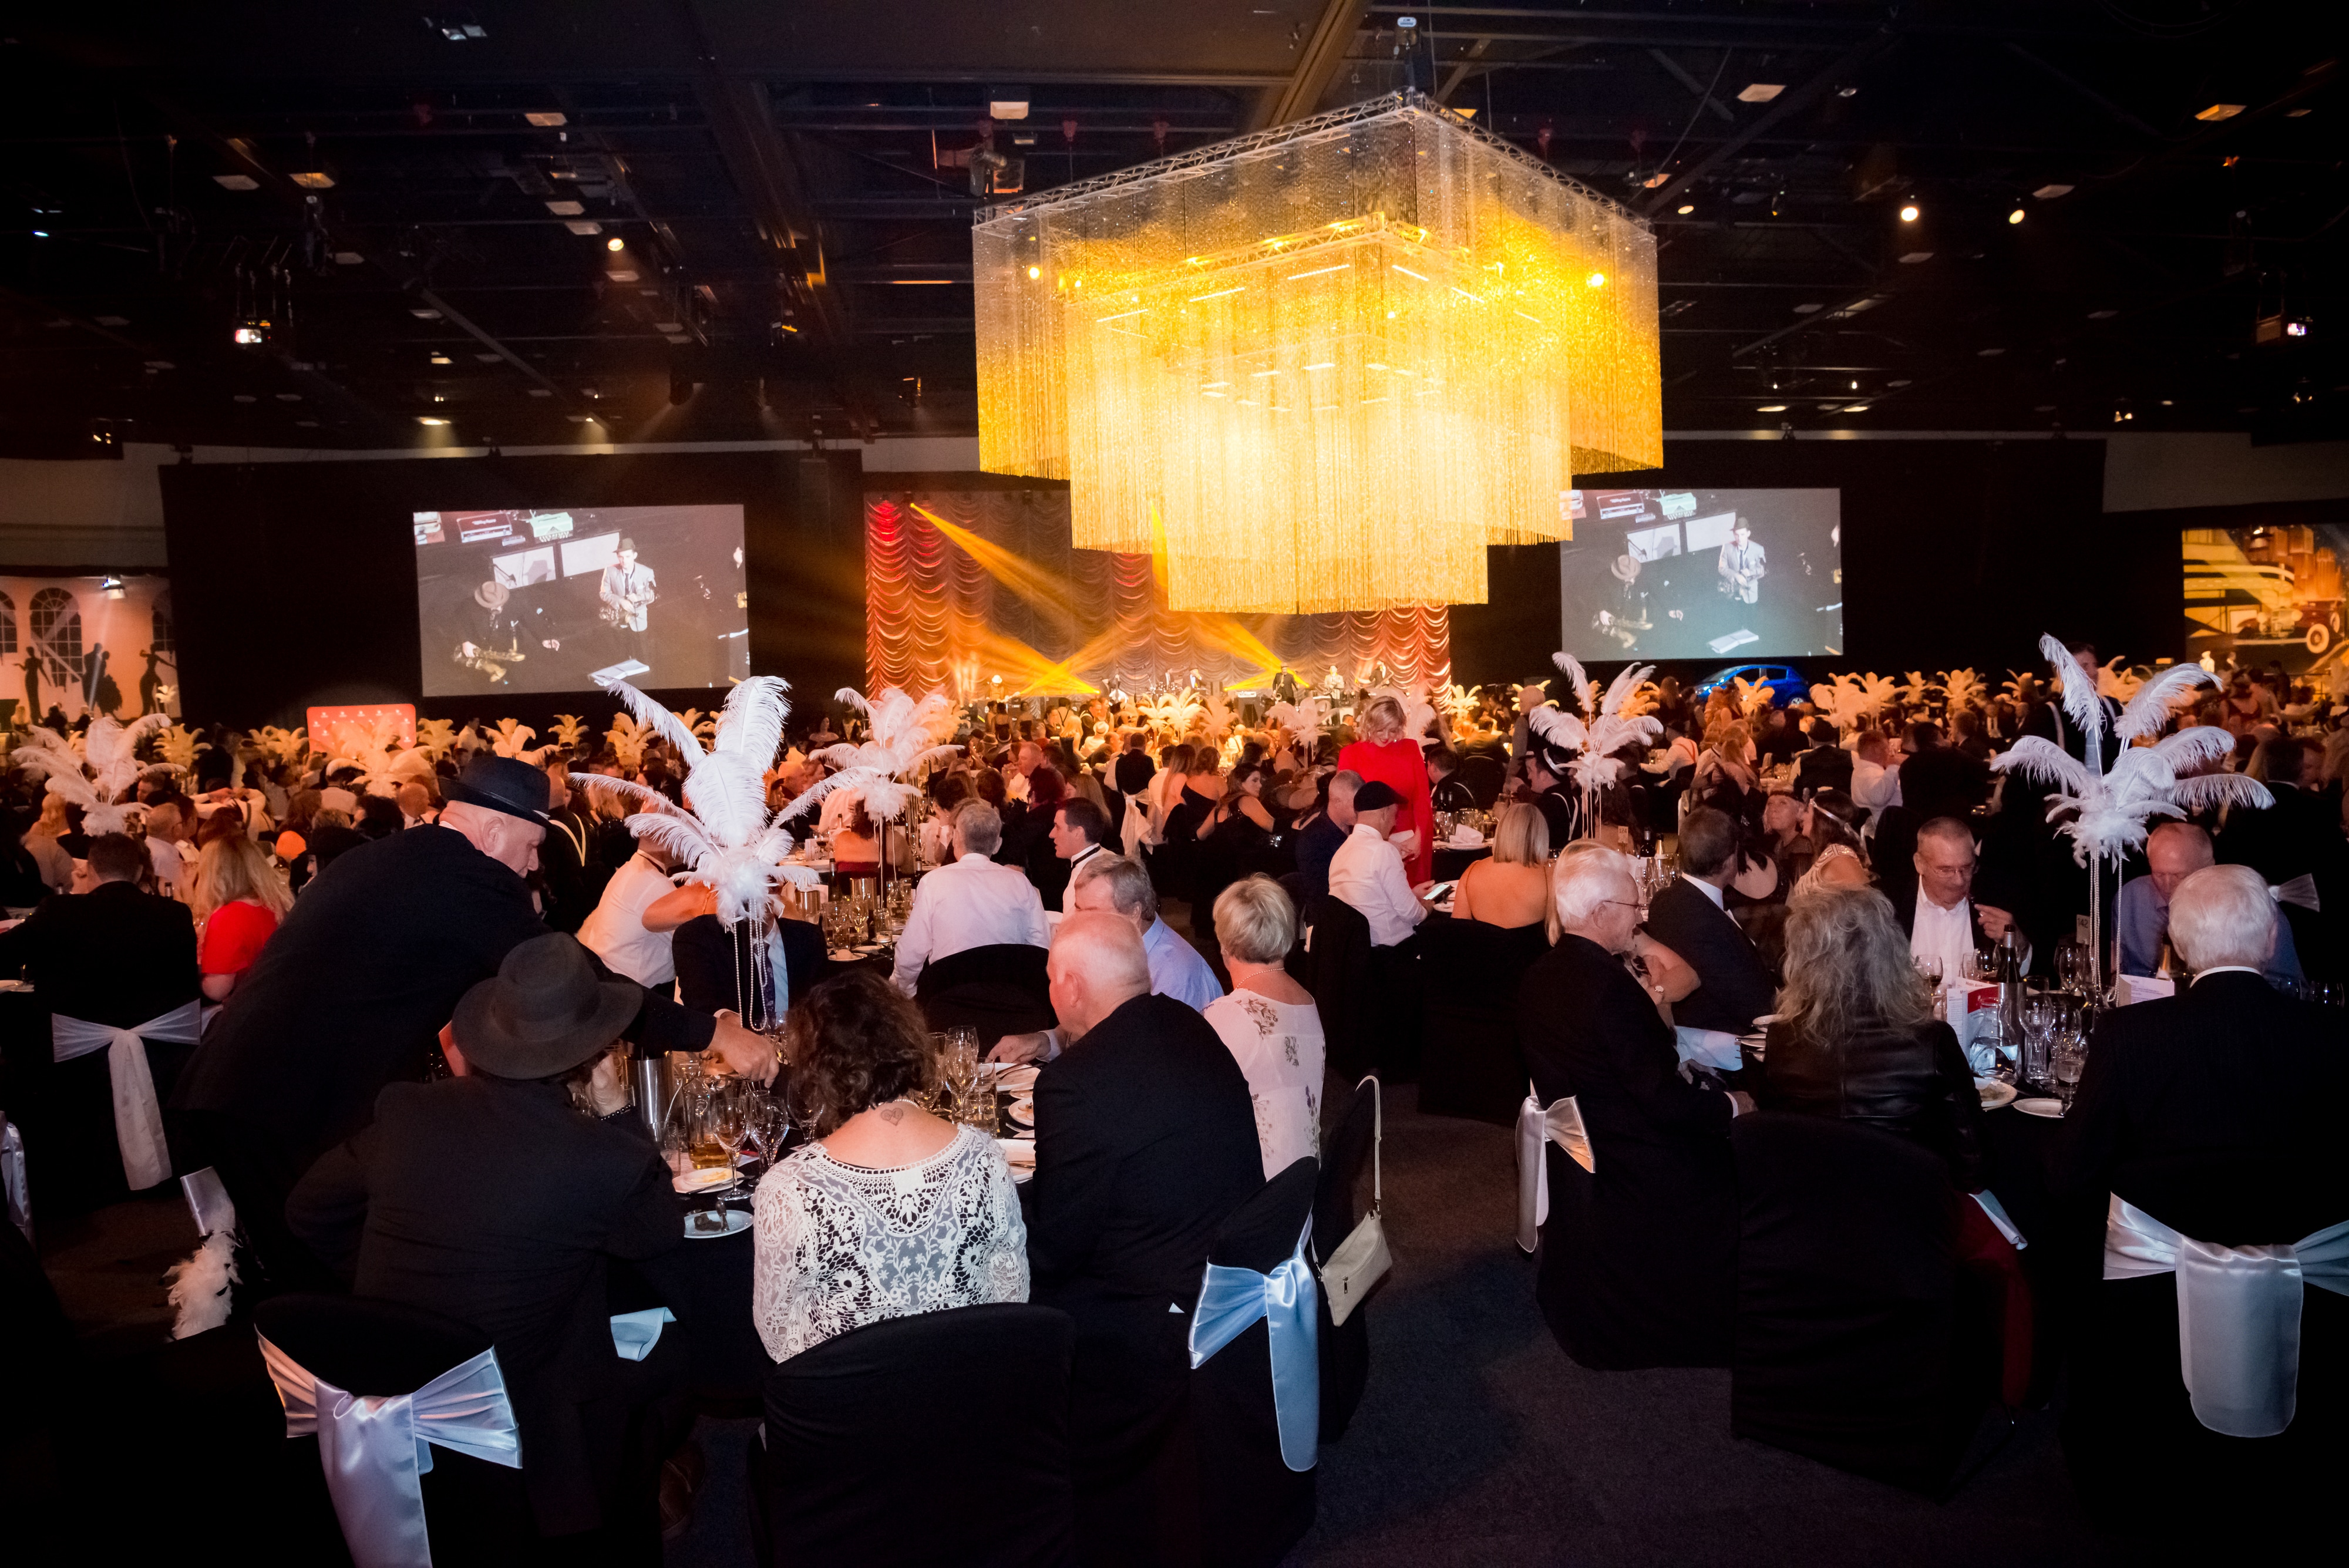 Variety SA Annual Themed Ball (2019): ‘Prohibition Ends At Last’